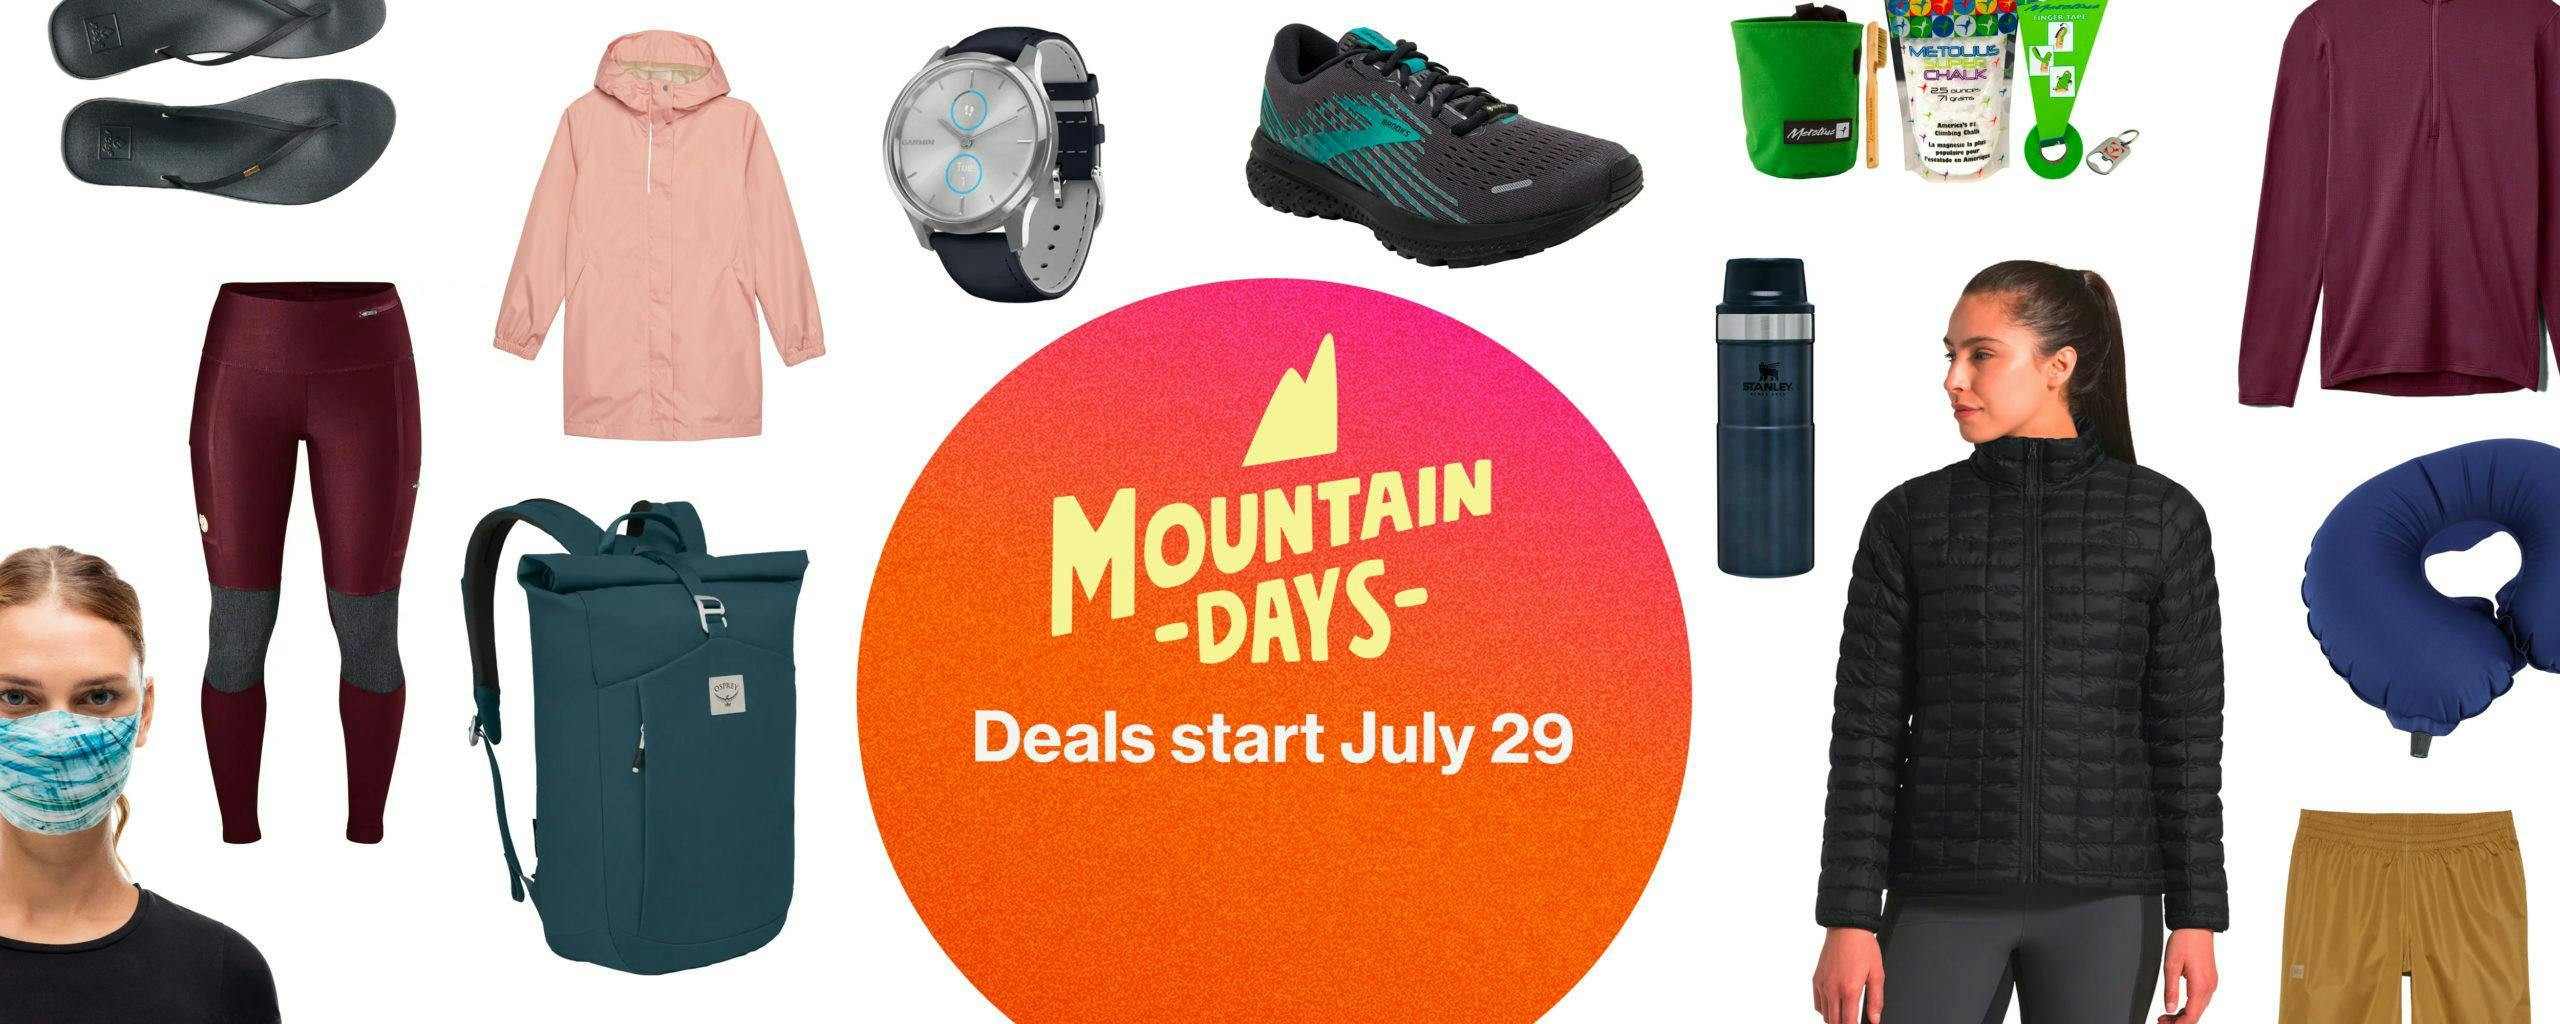 Favourite deals for Mountain Days